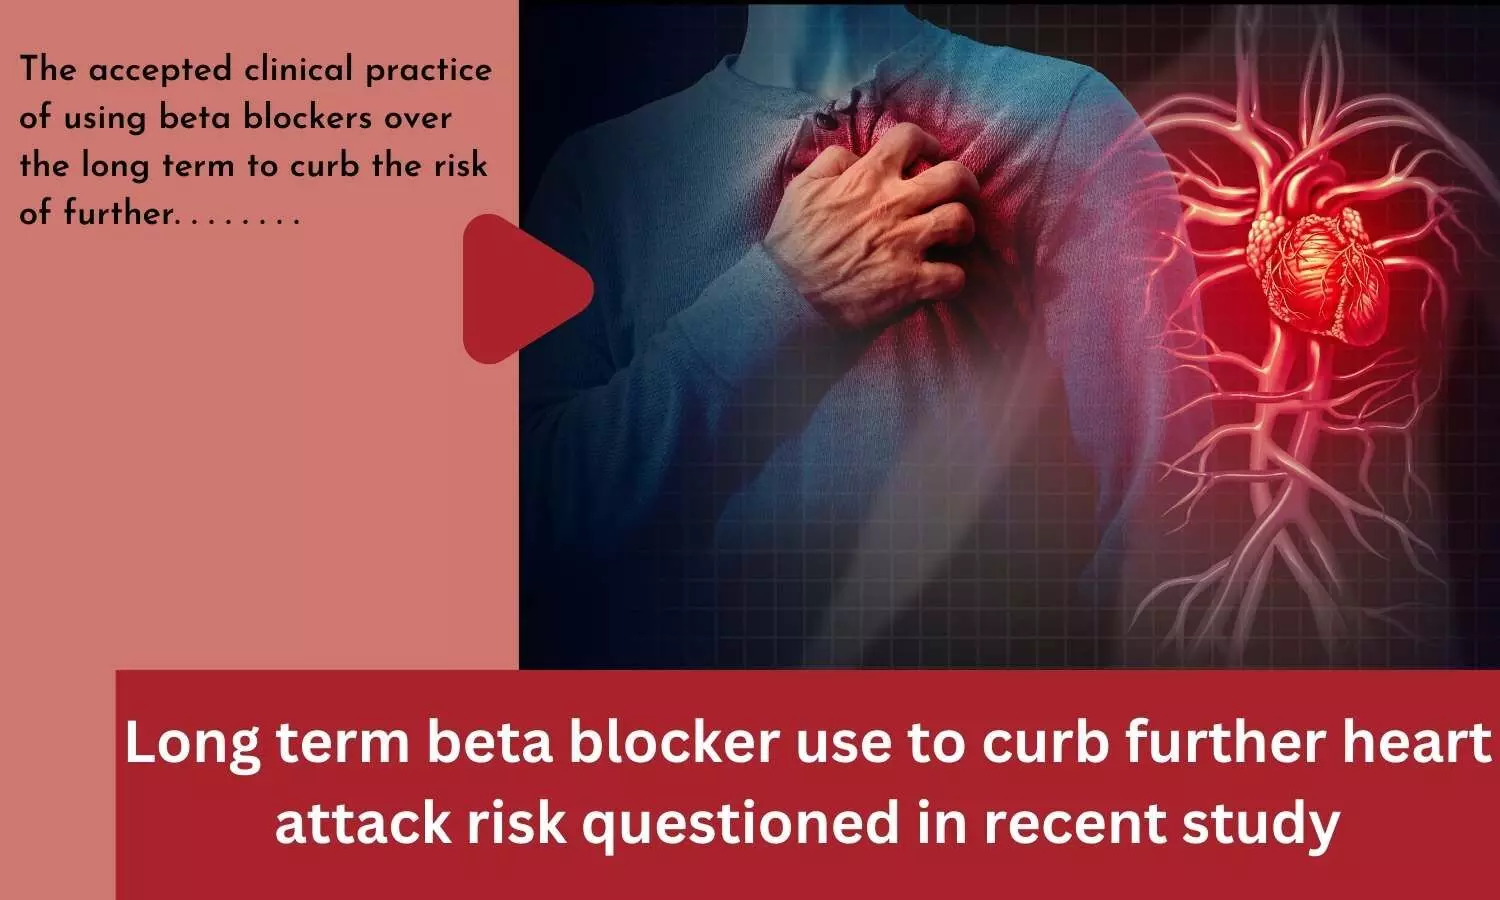 Long term beta blocker use to curb further heart attack risk questioned in recent study